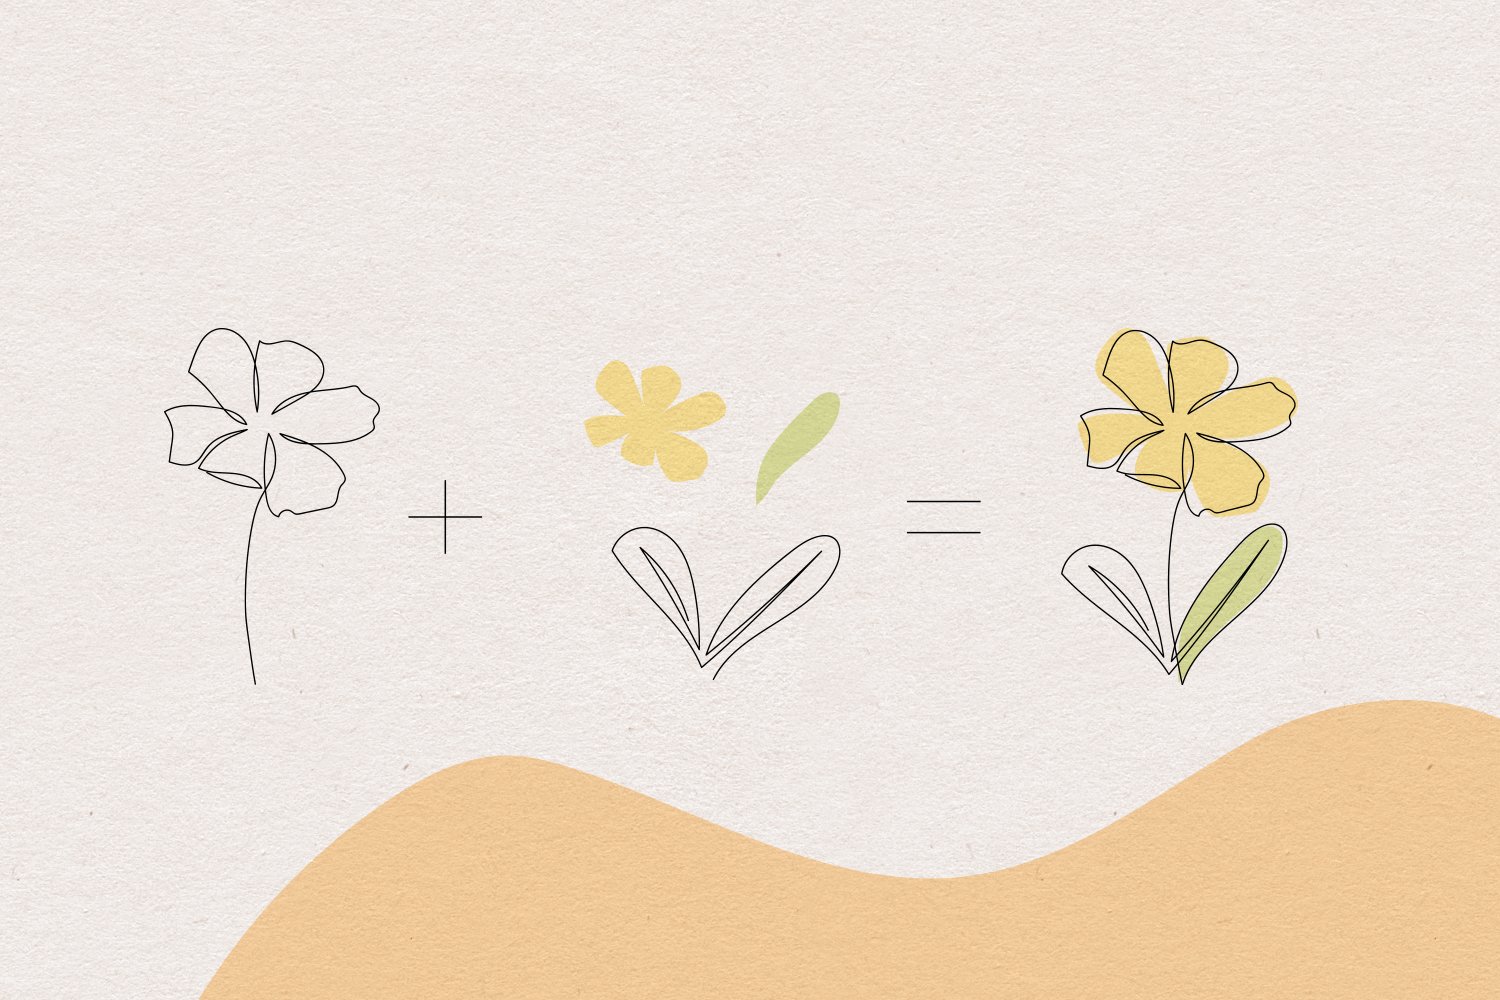 One Line Flowers & Abstract Shapes Vector Clip Art